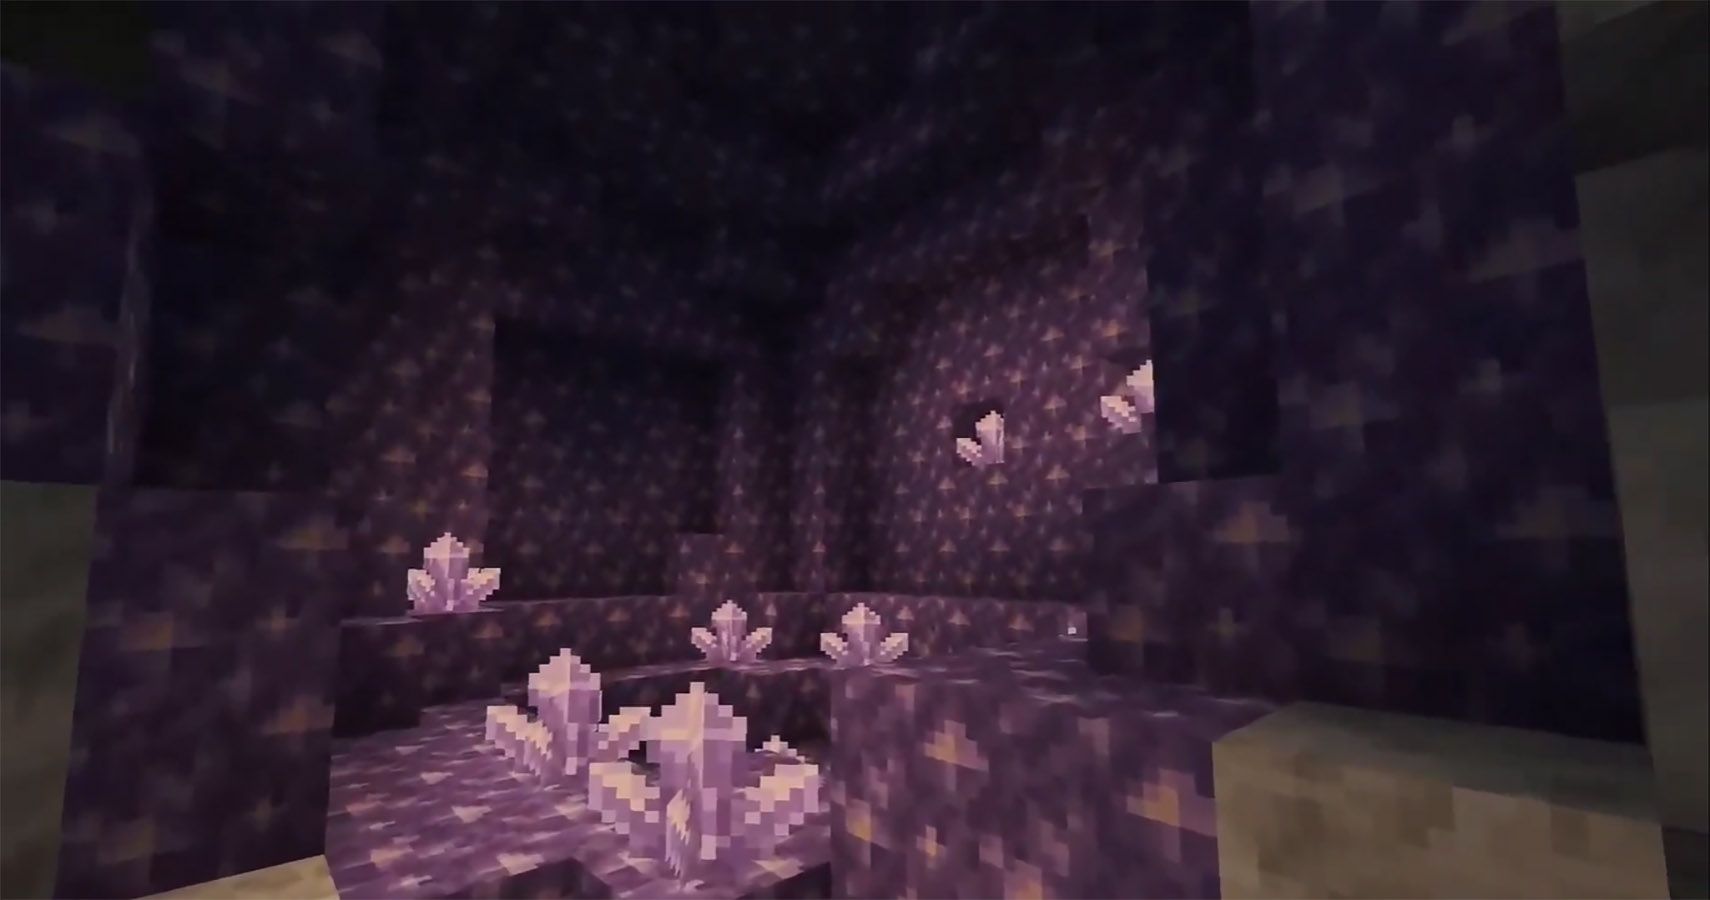 Amethyst geodes and crystals being introduced in 1.17